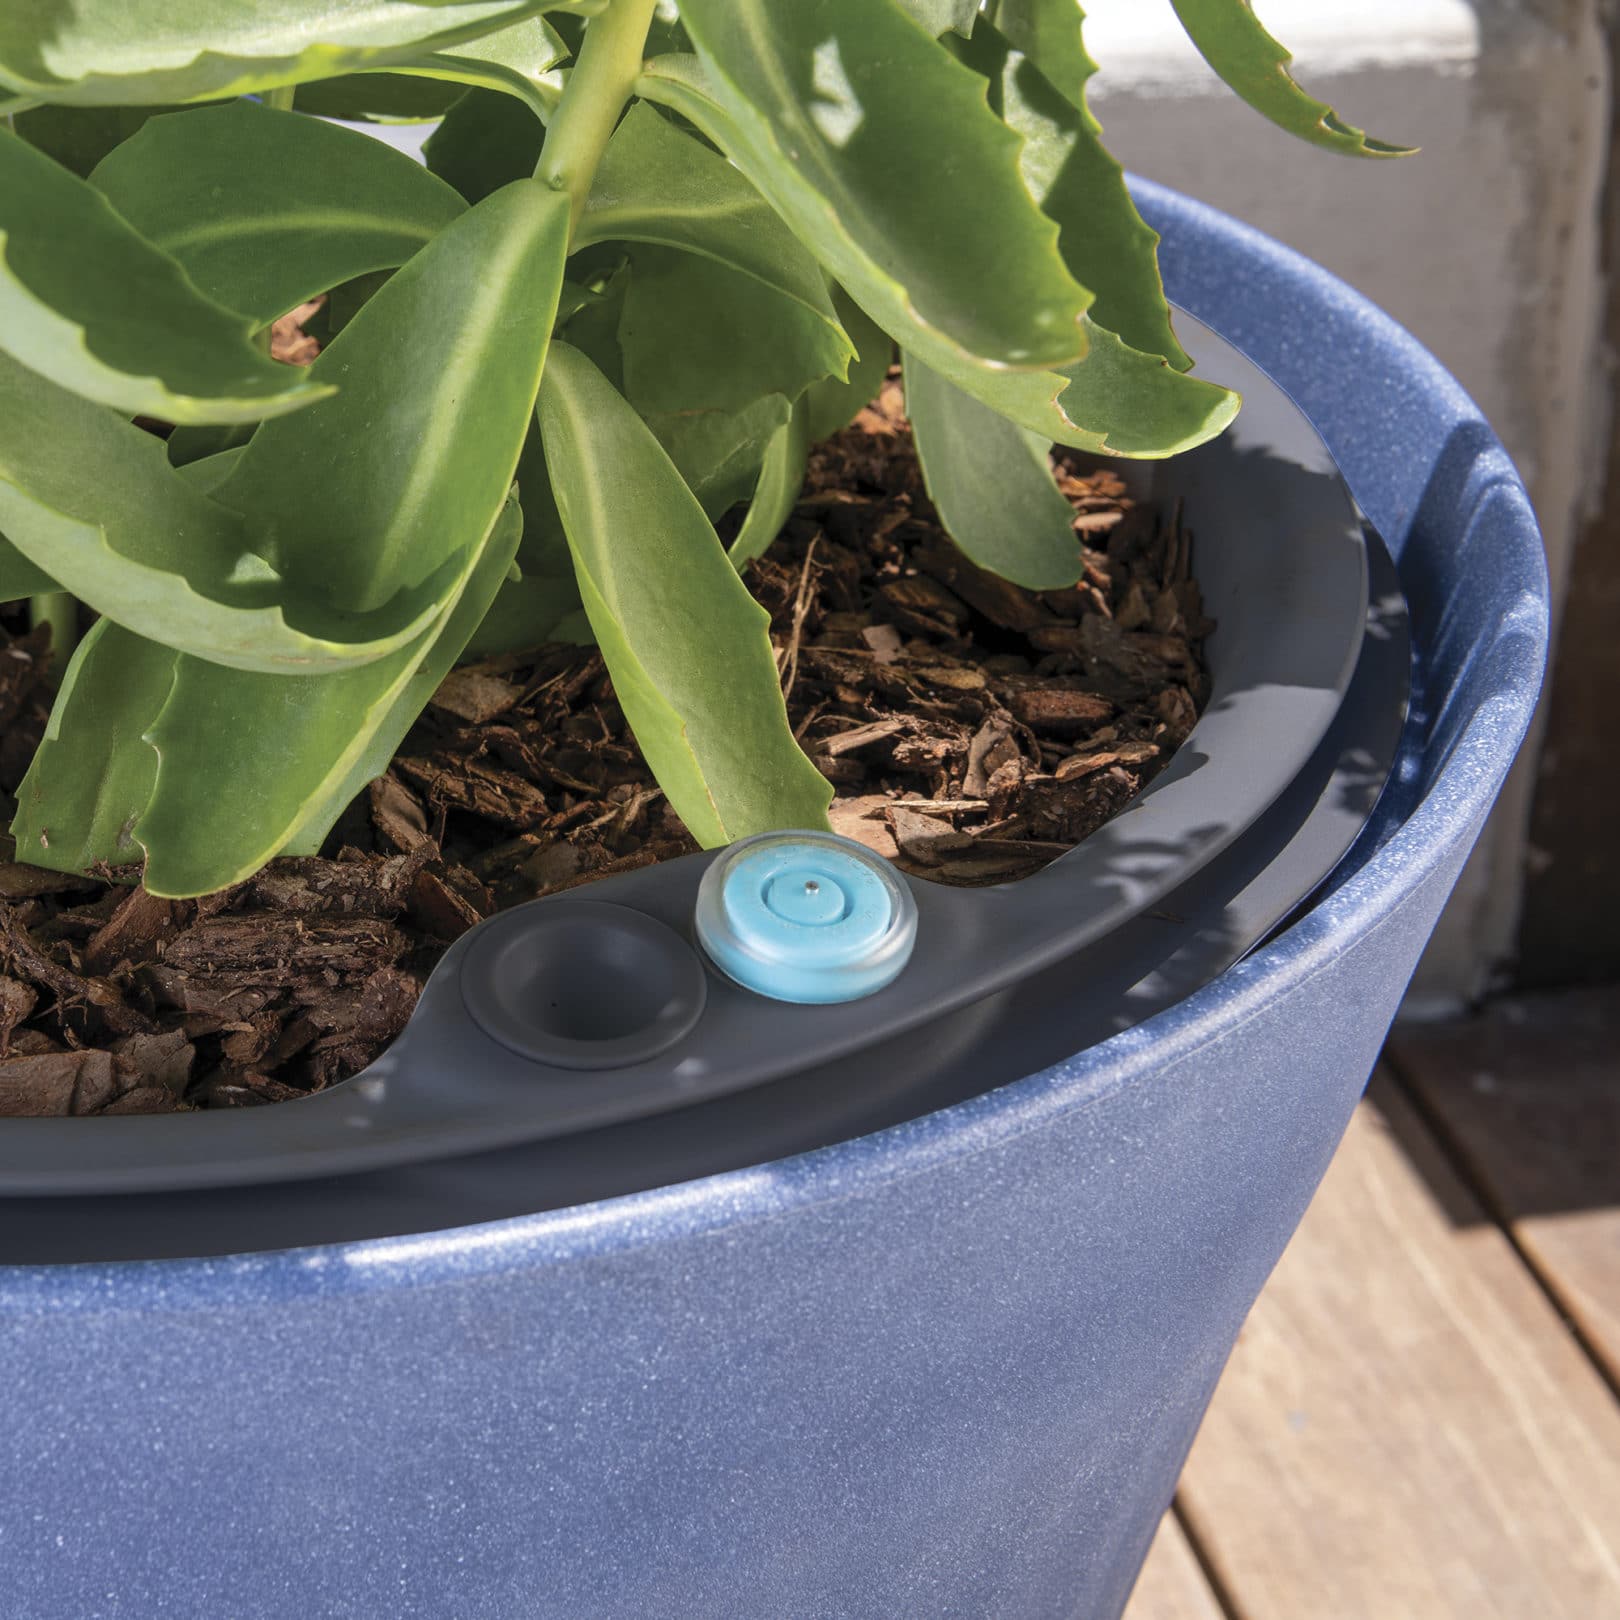 https://www.crescentgarden.com/wp-content/uploads/2020/05/TruDrop-Flex-Watering-System-Close-up-1-scaled.jpg